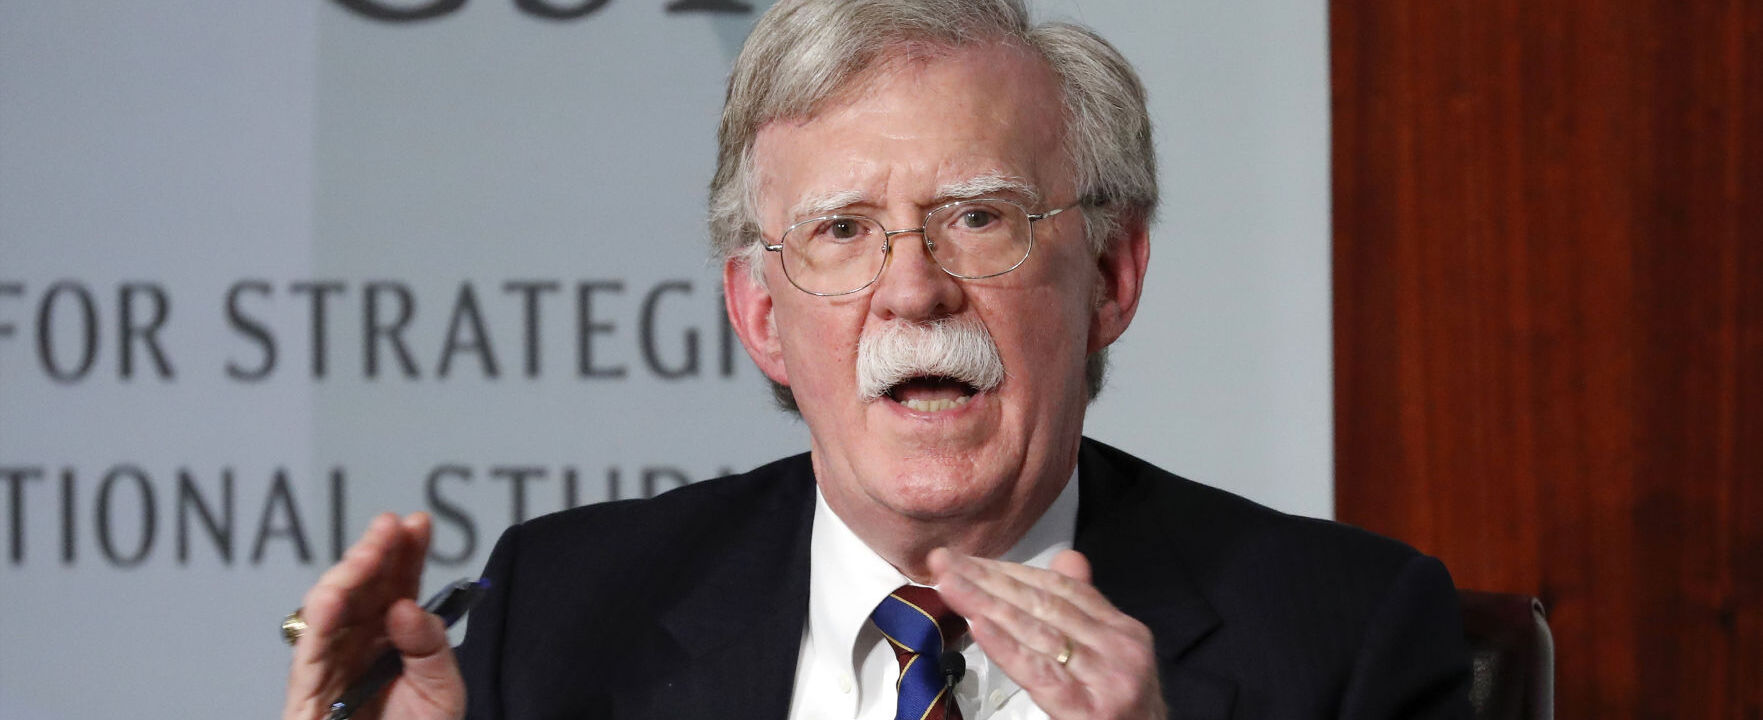 Are you going to read the John Bolton book?